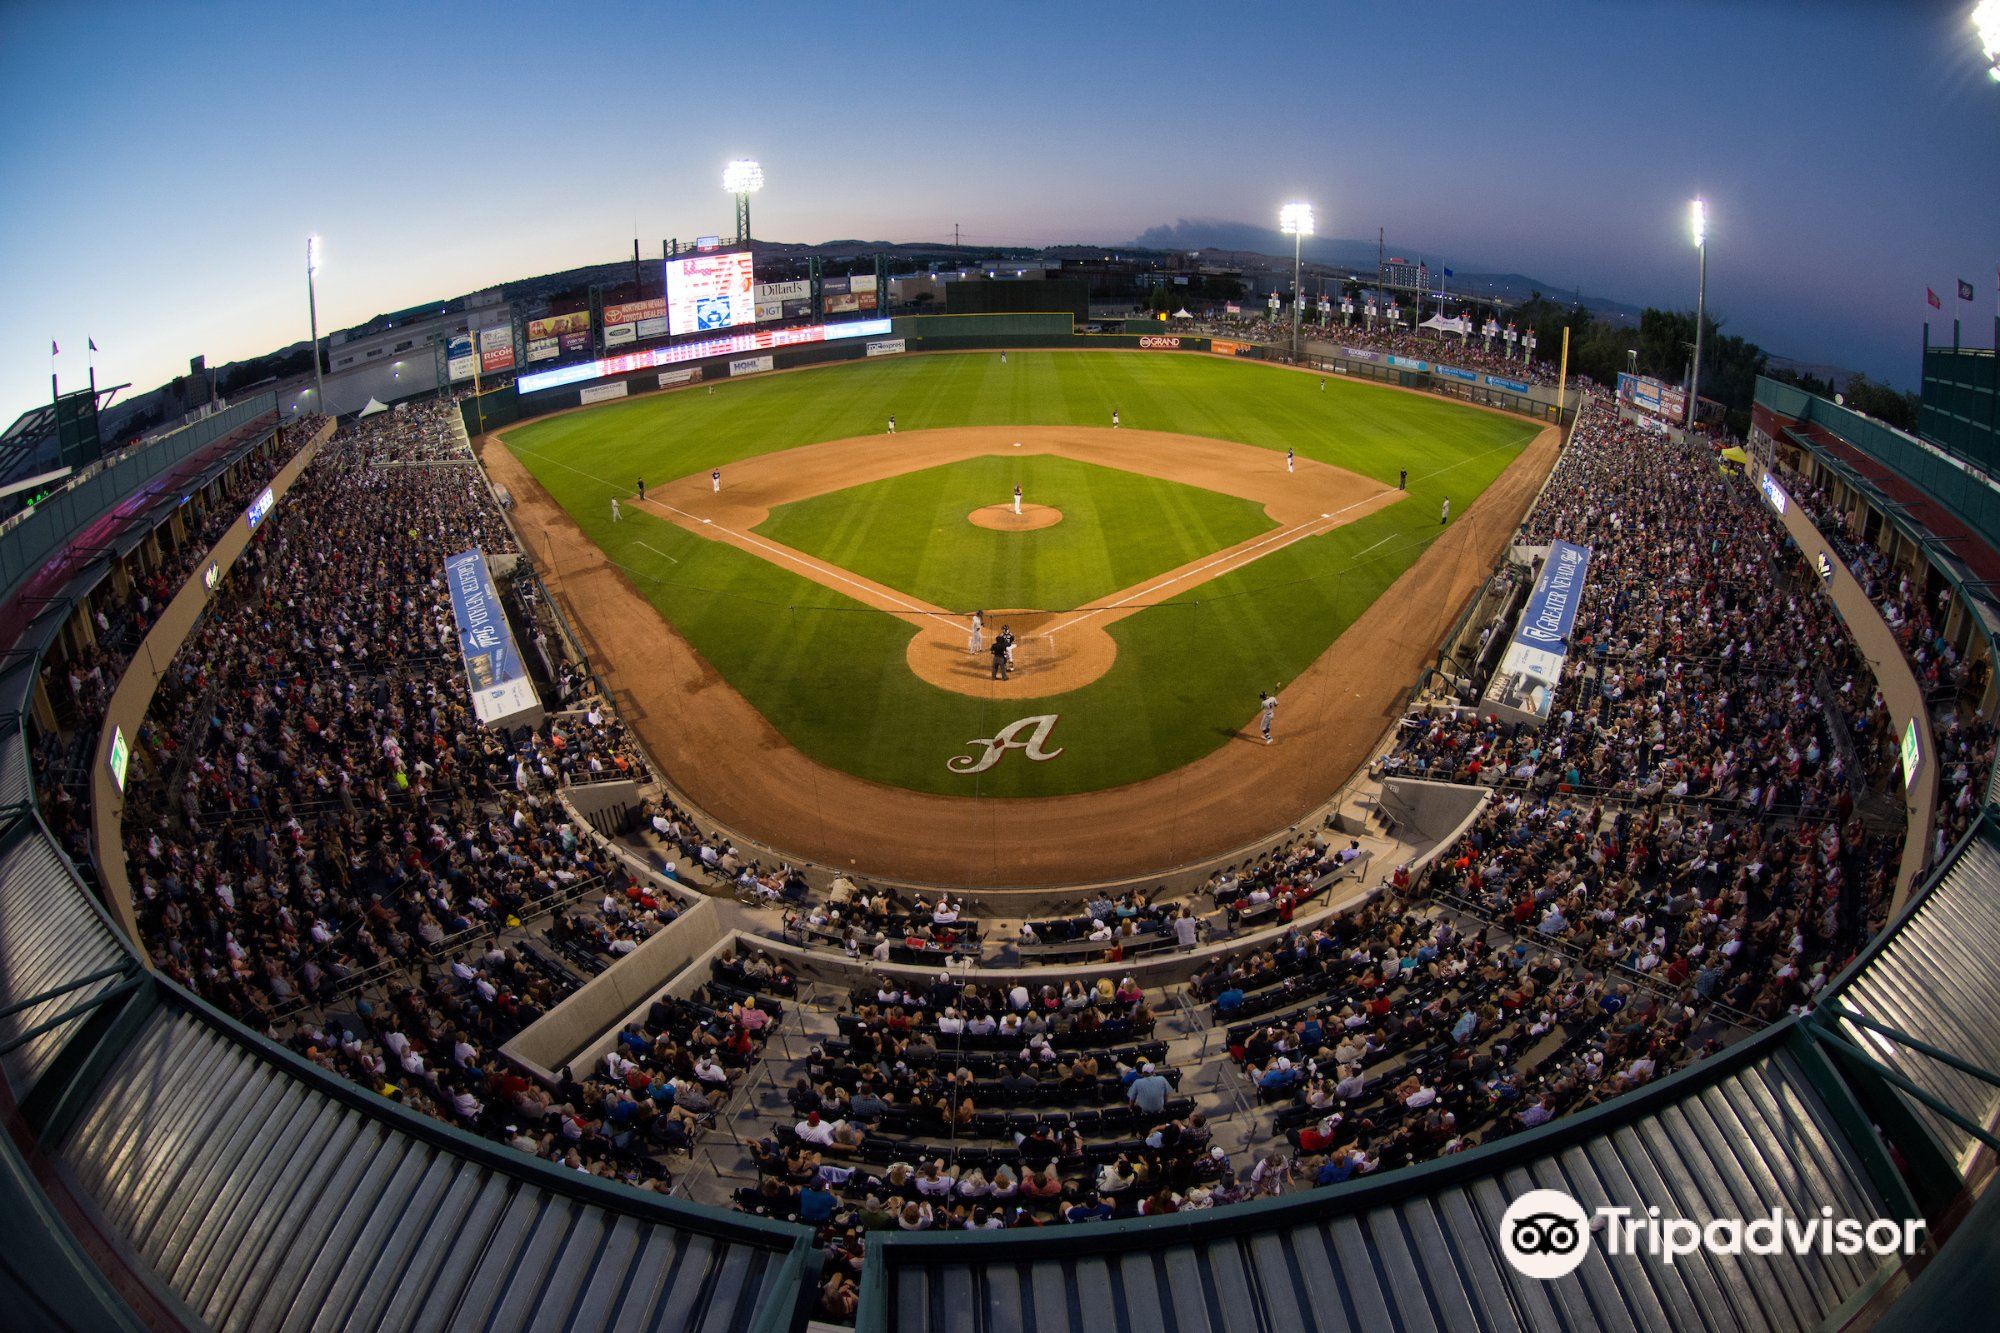 Visit Greater Nevada Field home of the Reno Aces